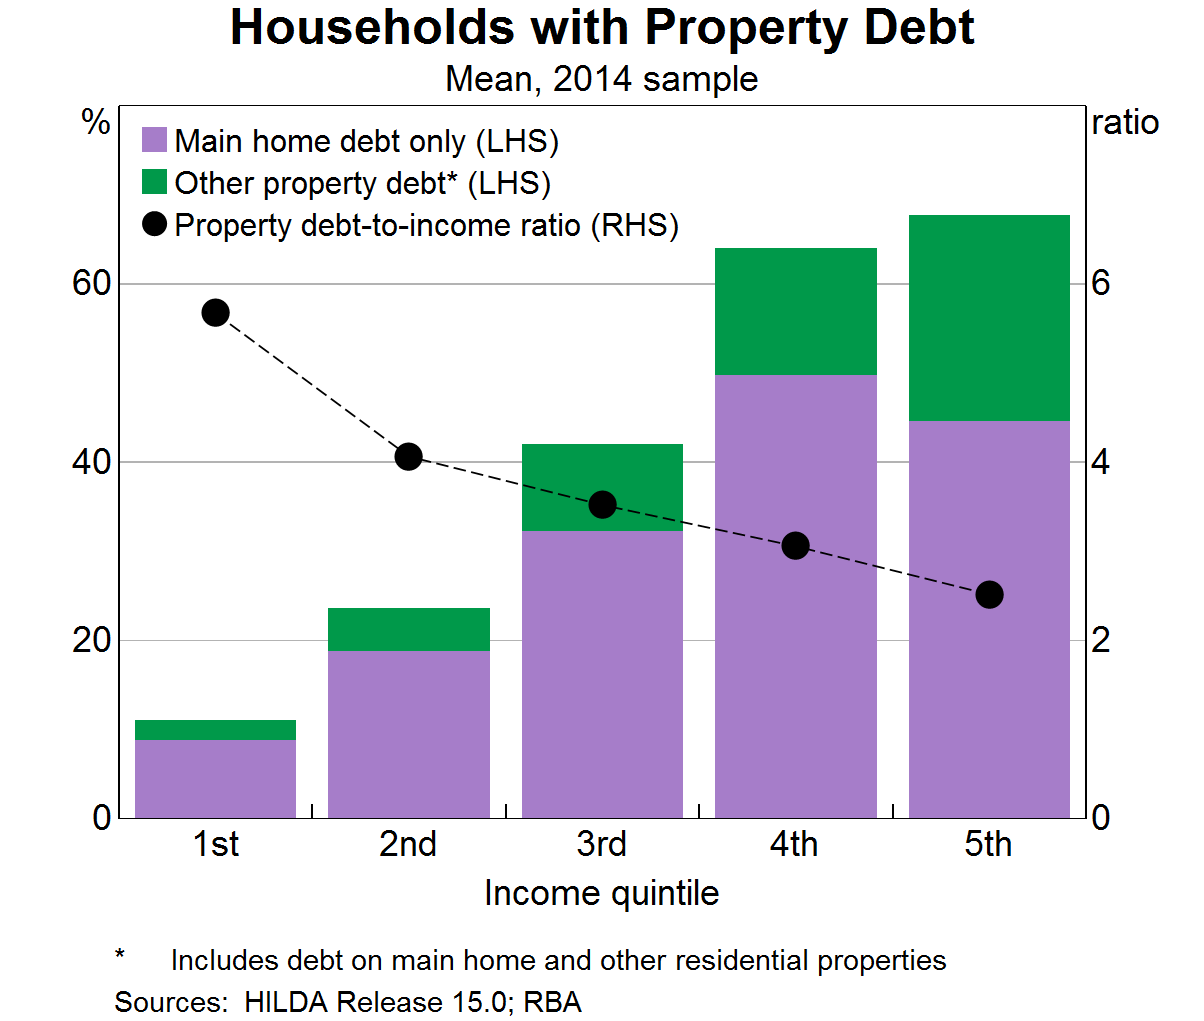 Graph 4: Households with Property Debt